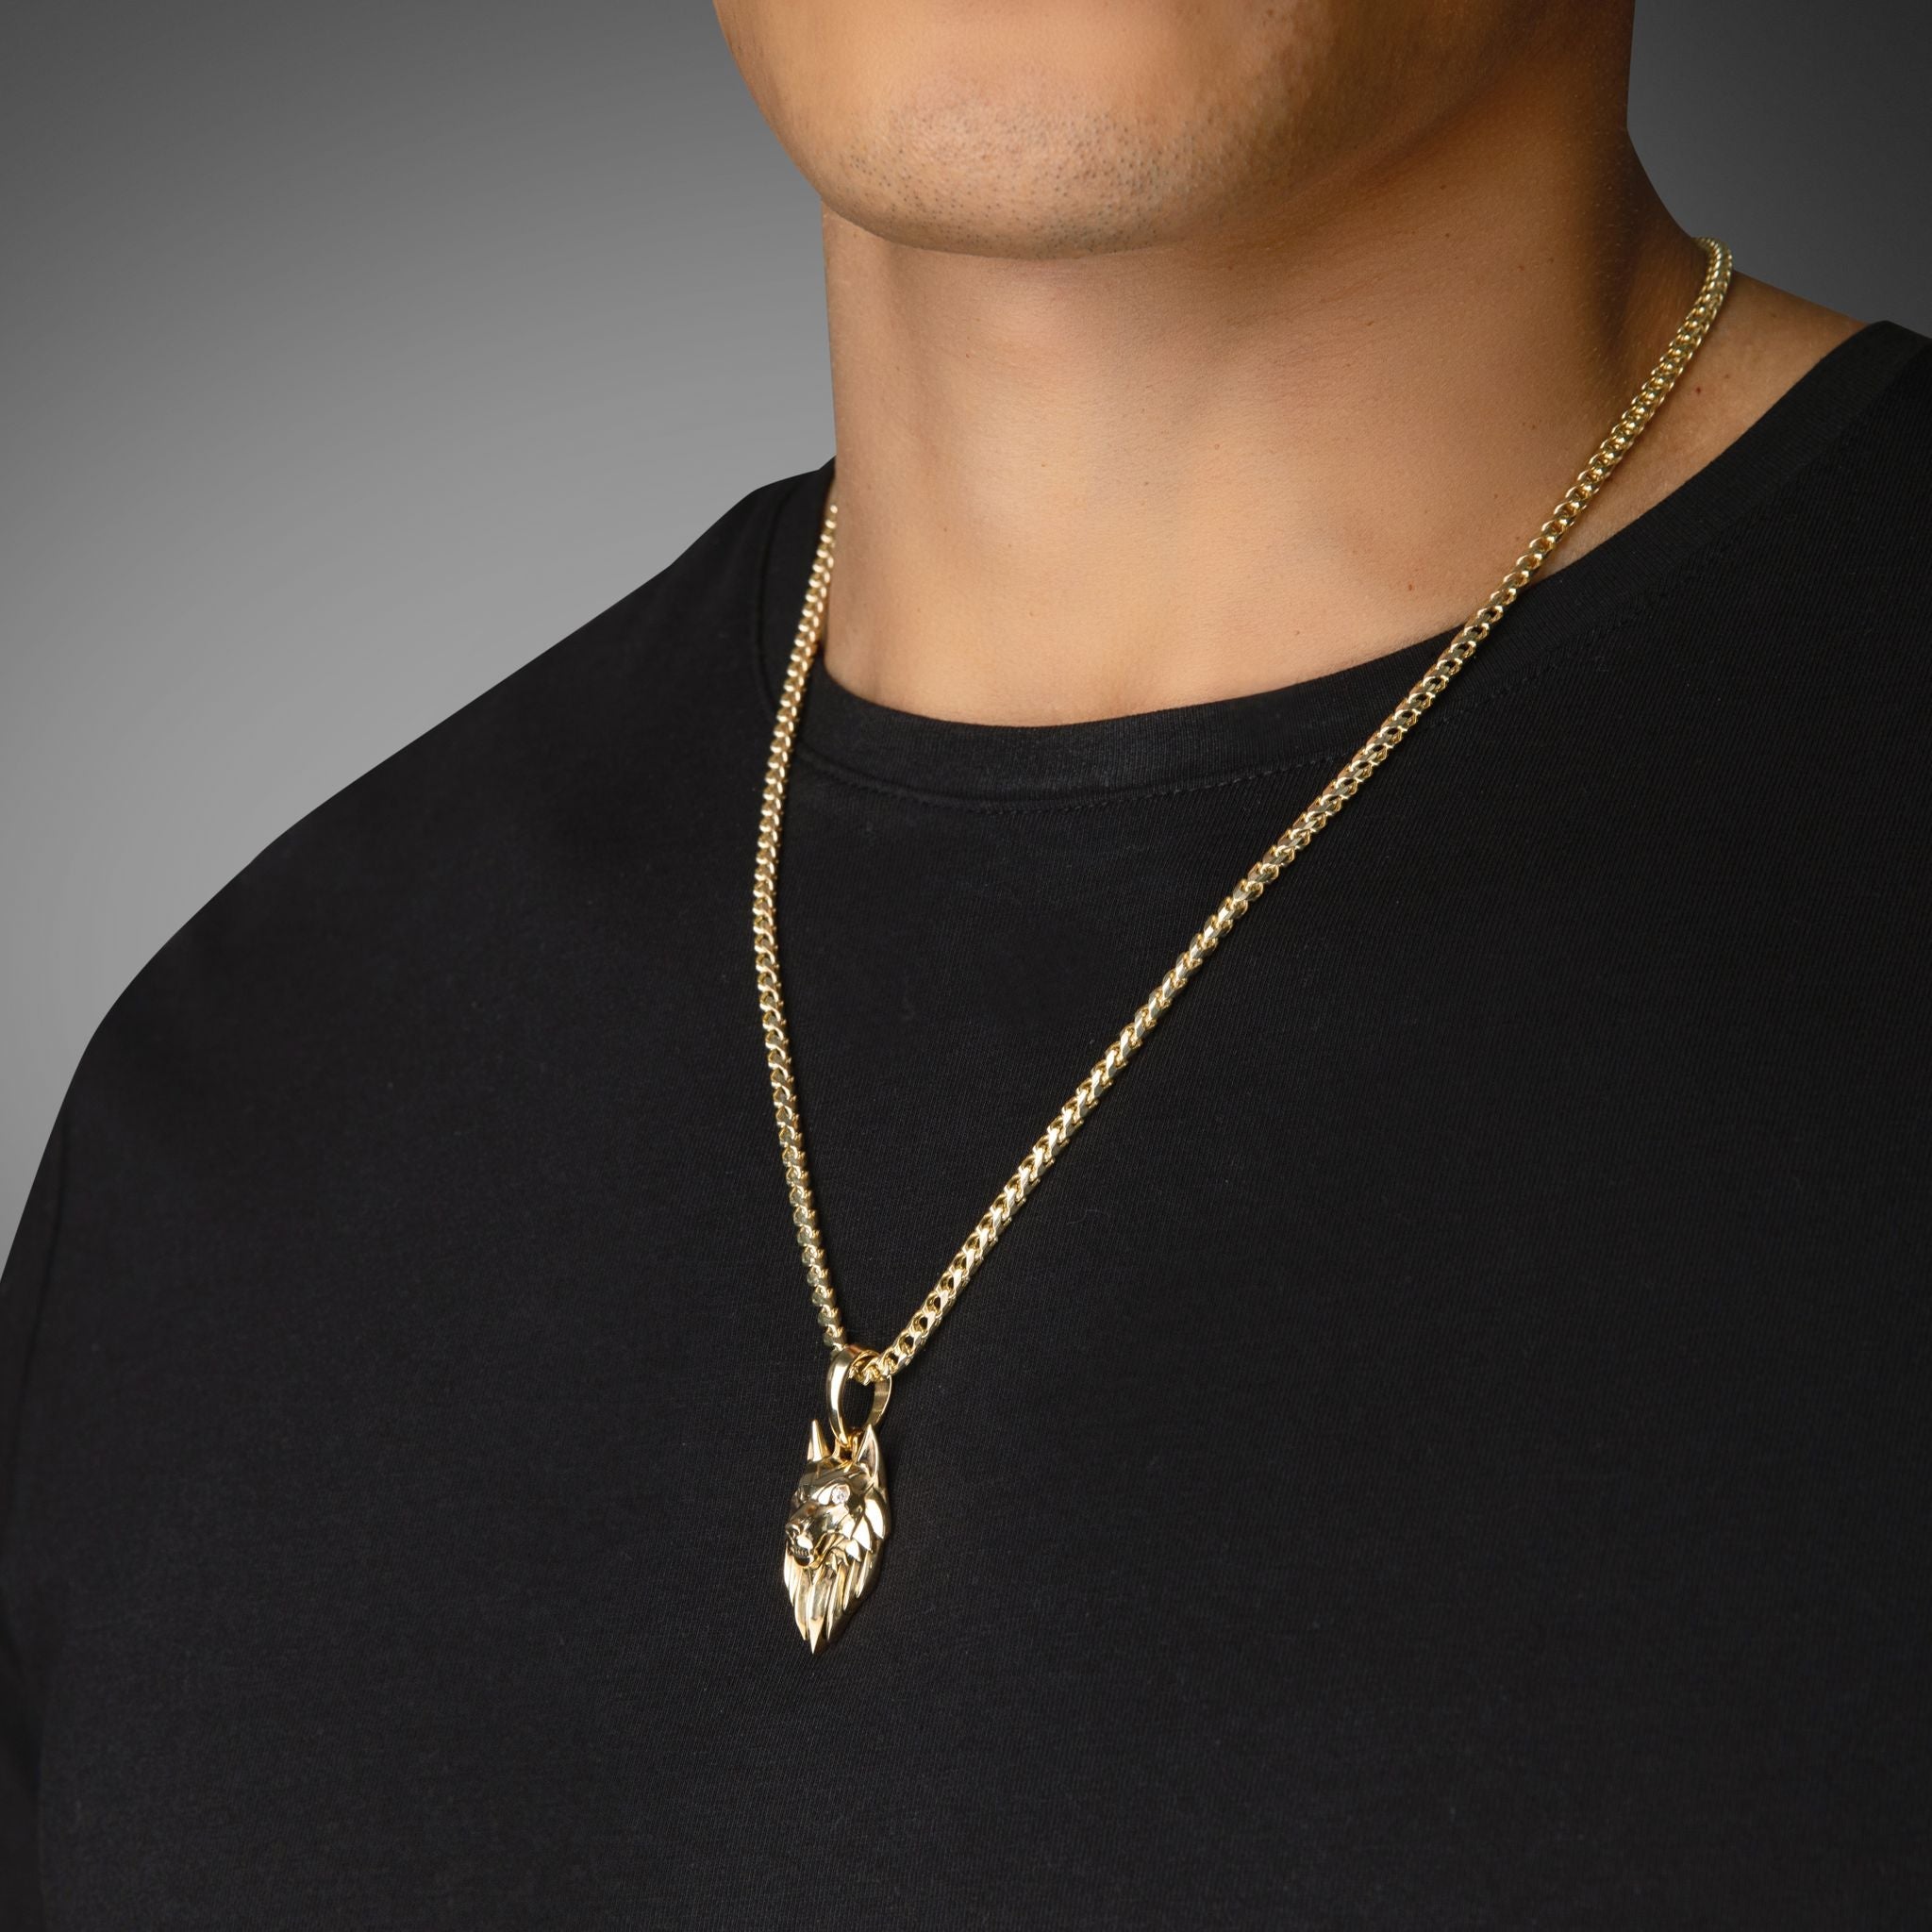 6.5mm Diamond Cut Franco Chain, 18K Gold Chain Men’s Solid Gold Necklace 26 Inches / Lion & Snake Clasp